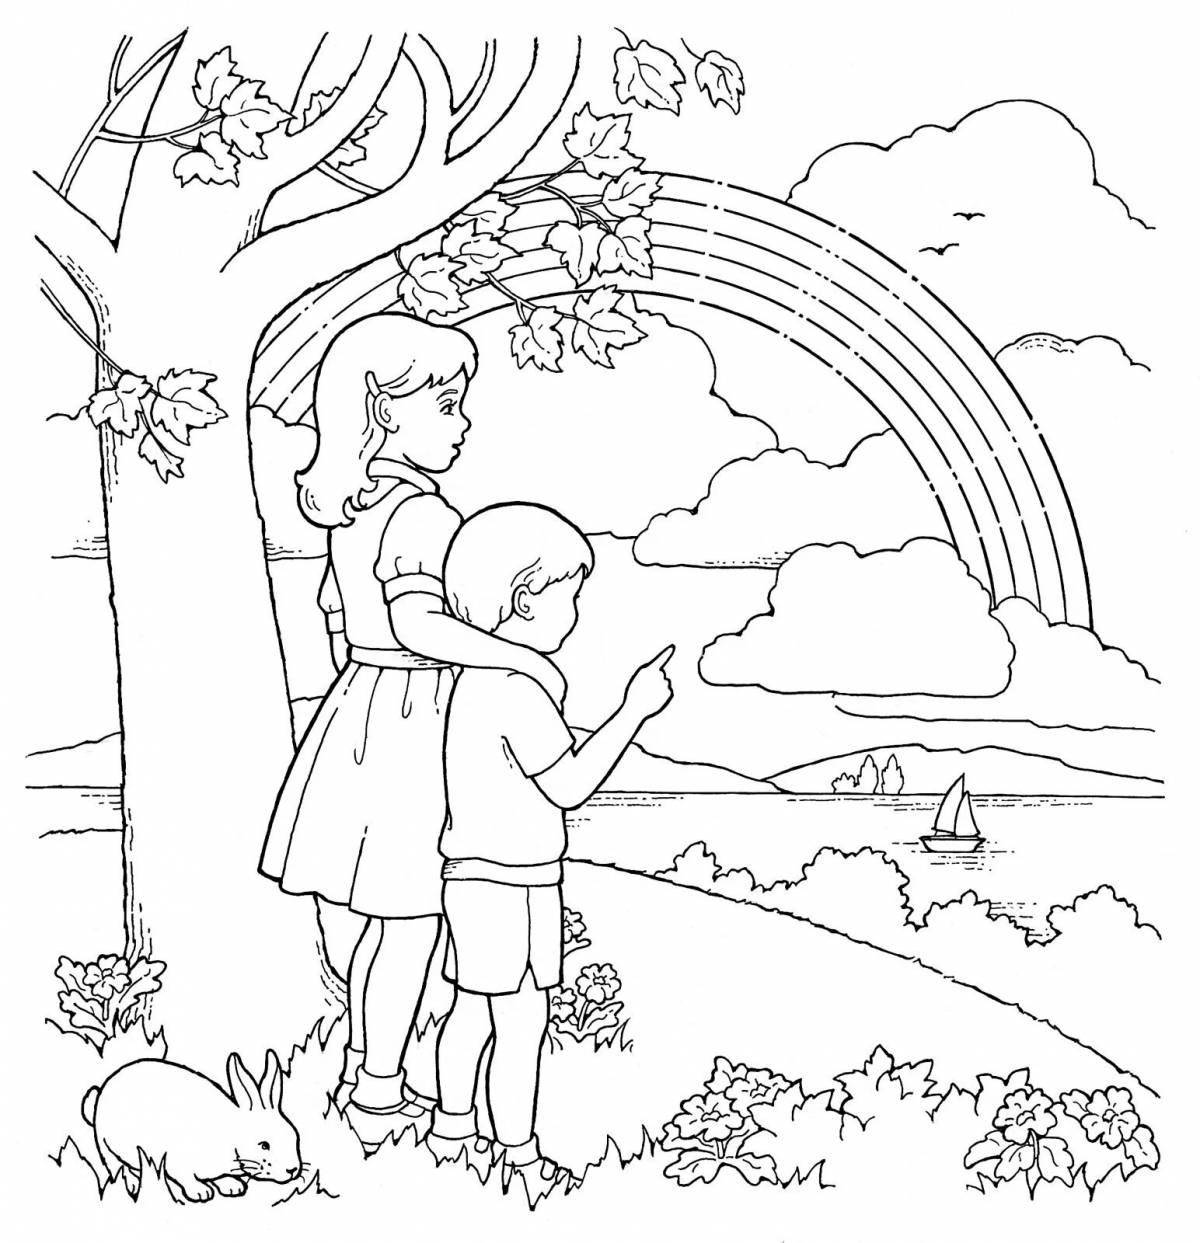 Colored Sunday school coloring book